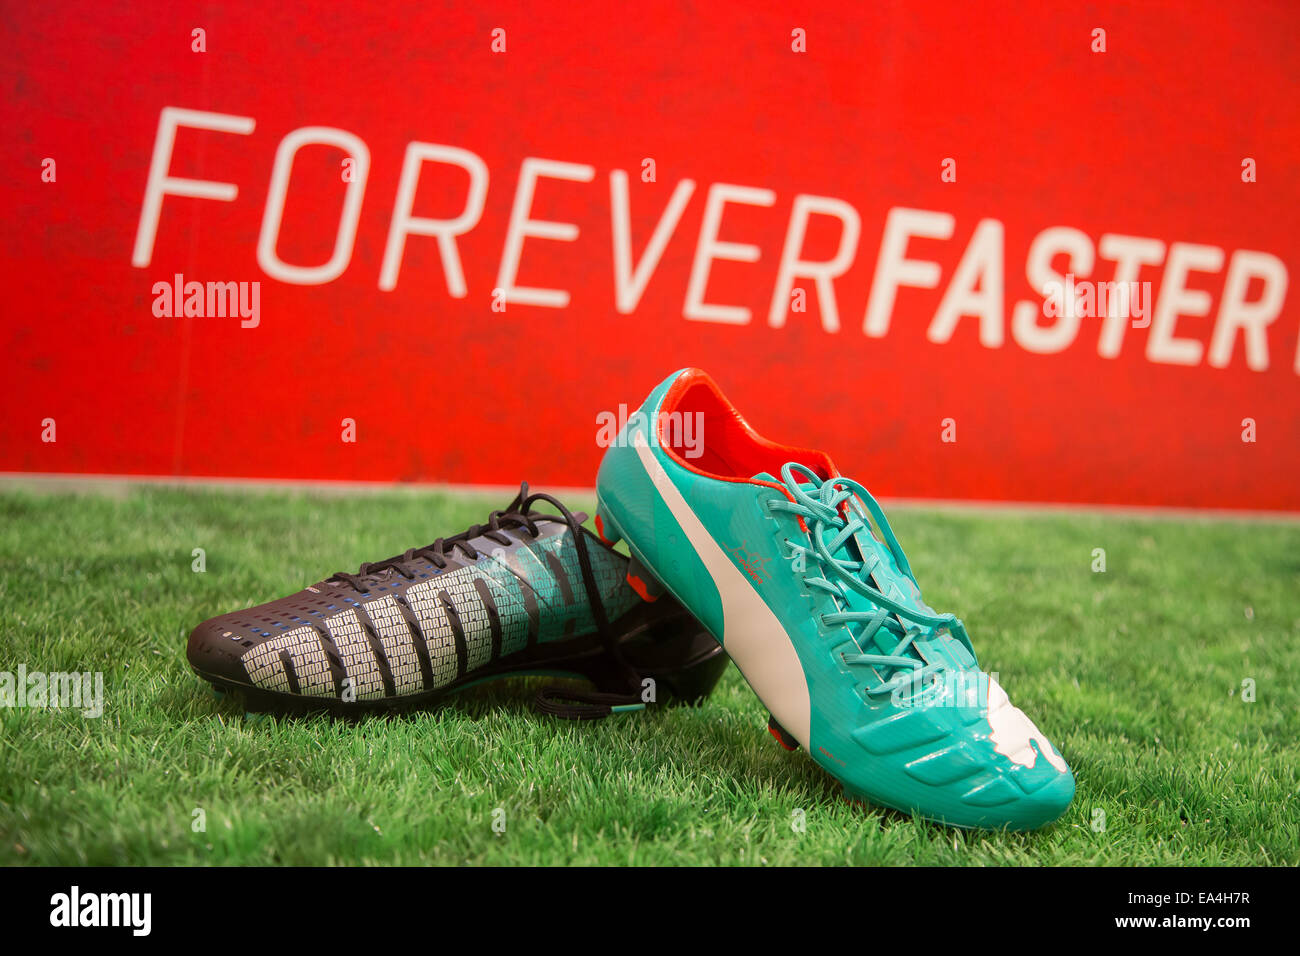 PUMA football boot evoSPEED (l.) and evoPOWER lying on the grass with  Forever Faster slogan in the background. COMMERCIAL HANDOUT/EDITORIAL USE  ONLY/NO SALES. Please quote the source 